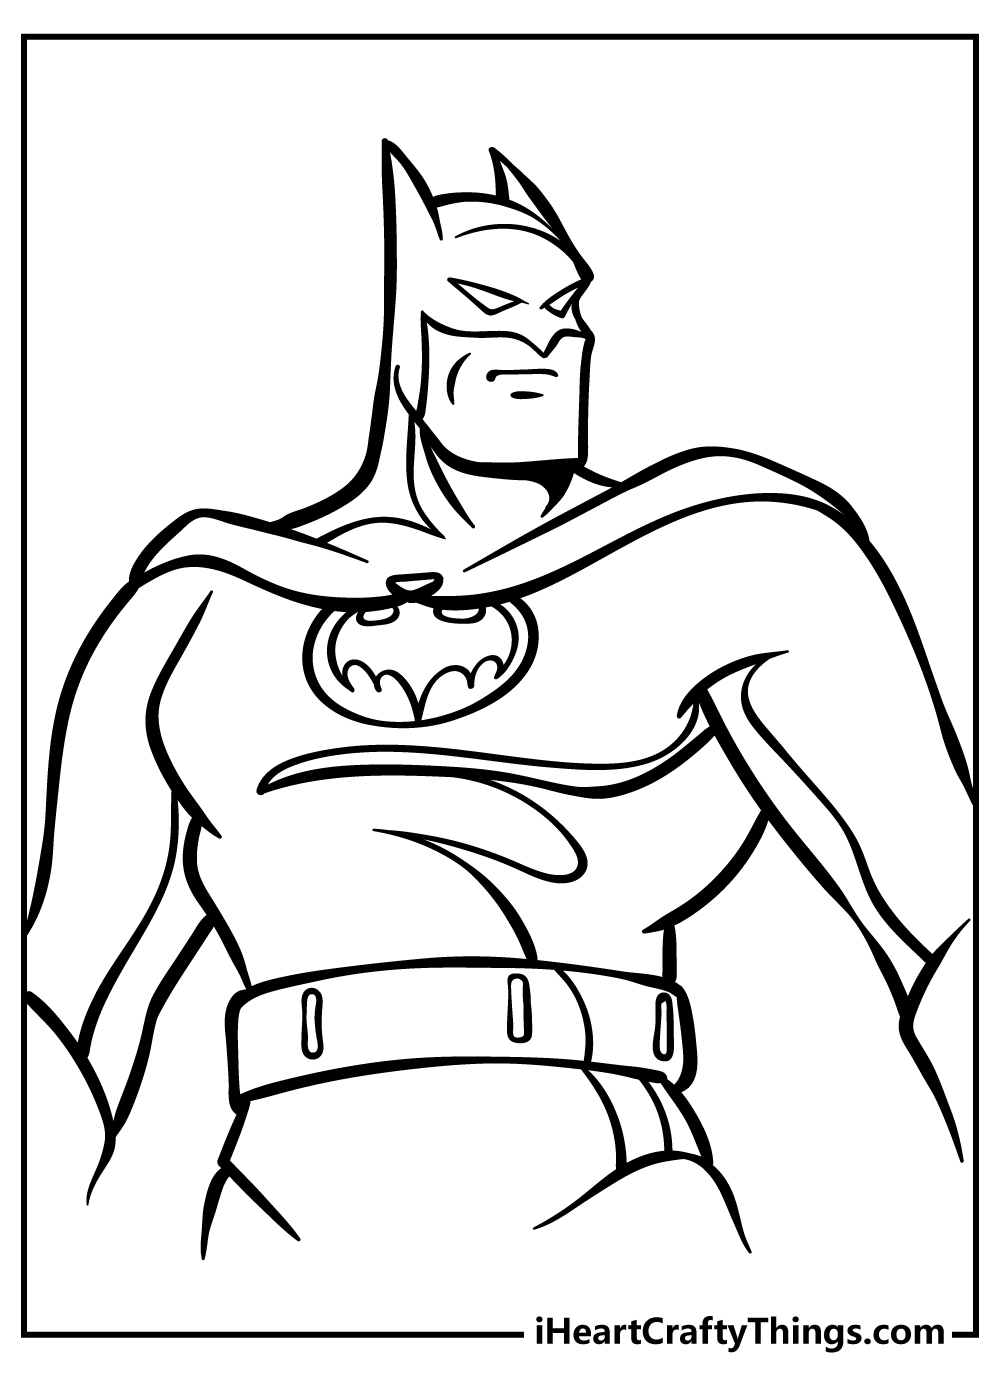 Printable Batman Coloring Pages Updated 21